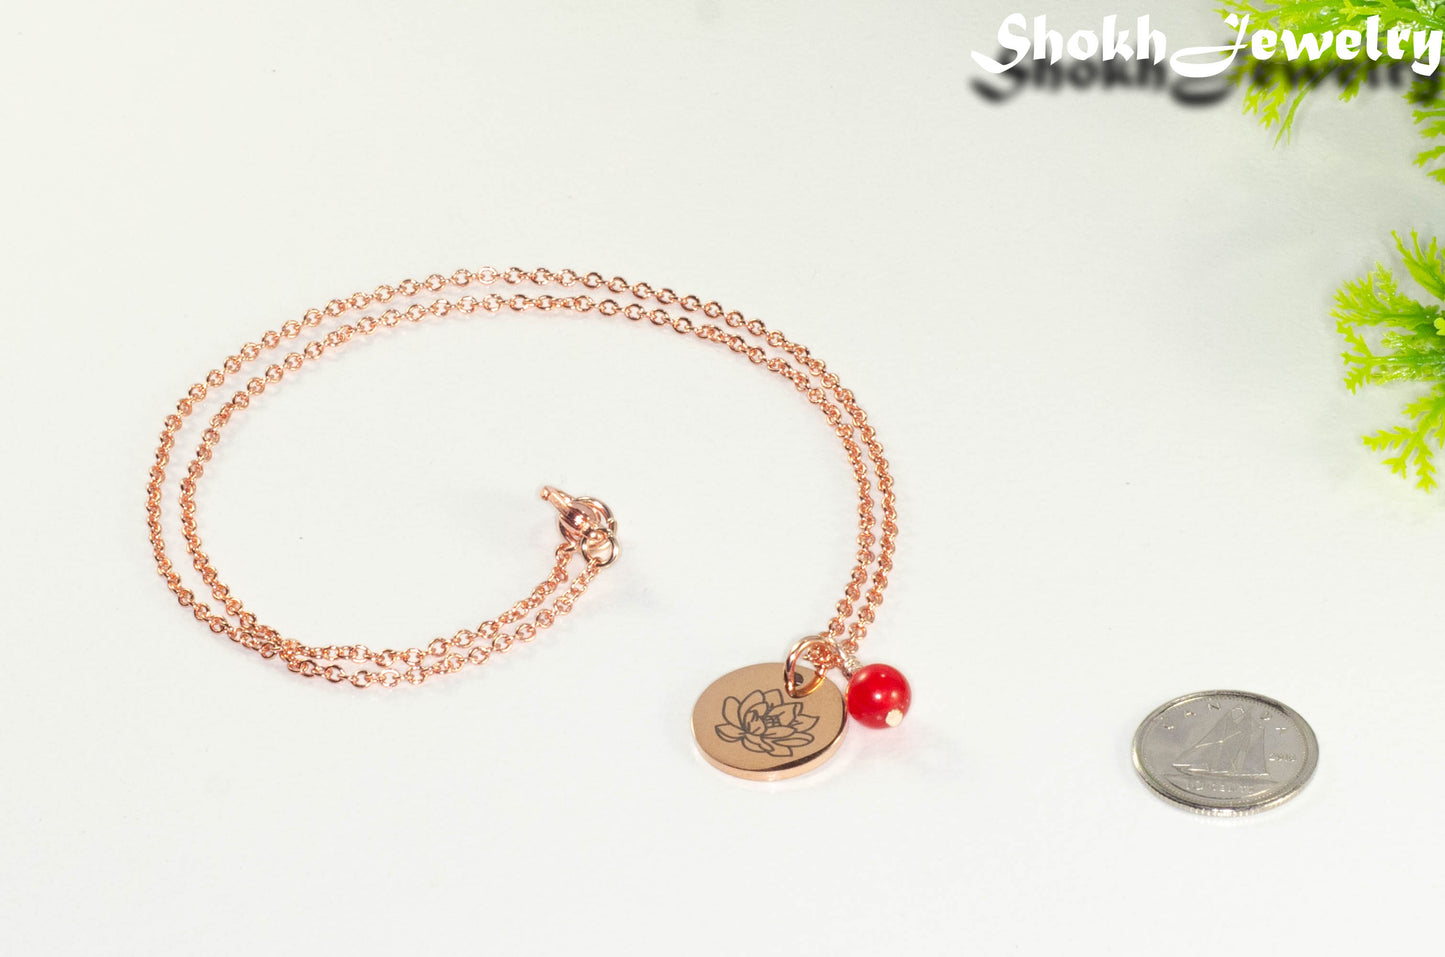 Rose Gold Plated July Birth Flower Necklace with Red Ruby Birthstone Pendant beside a dime.